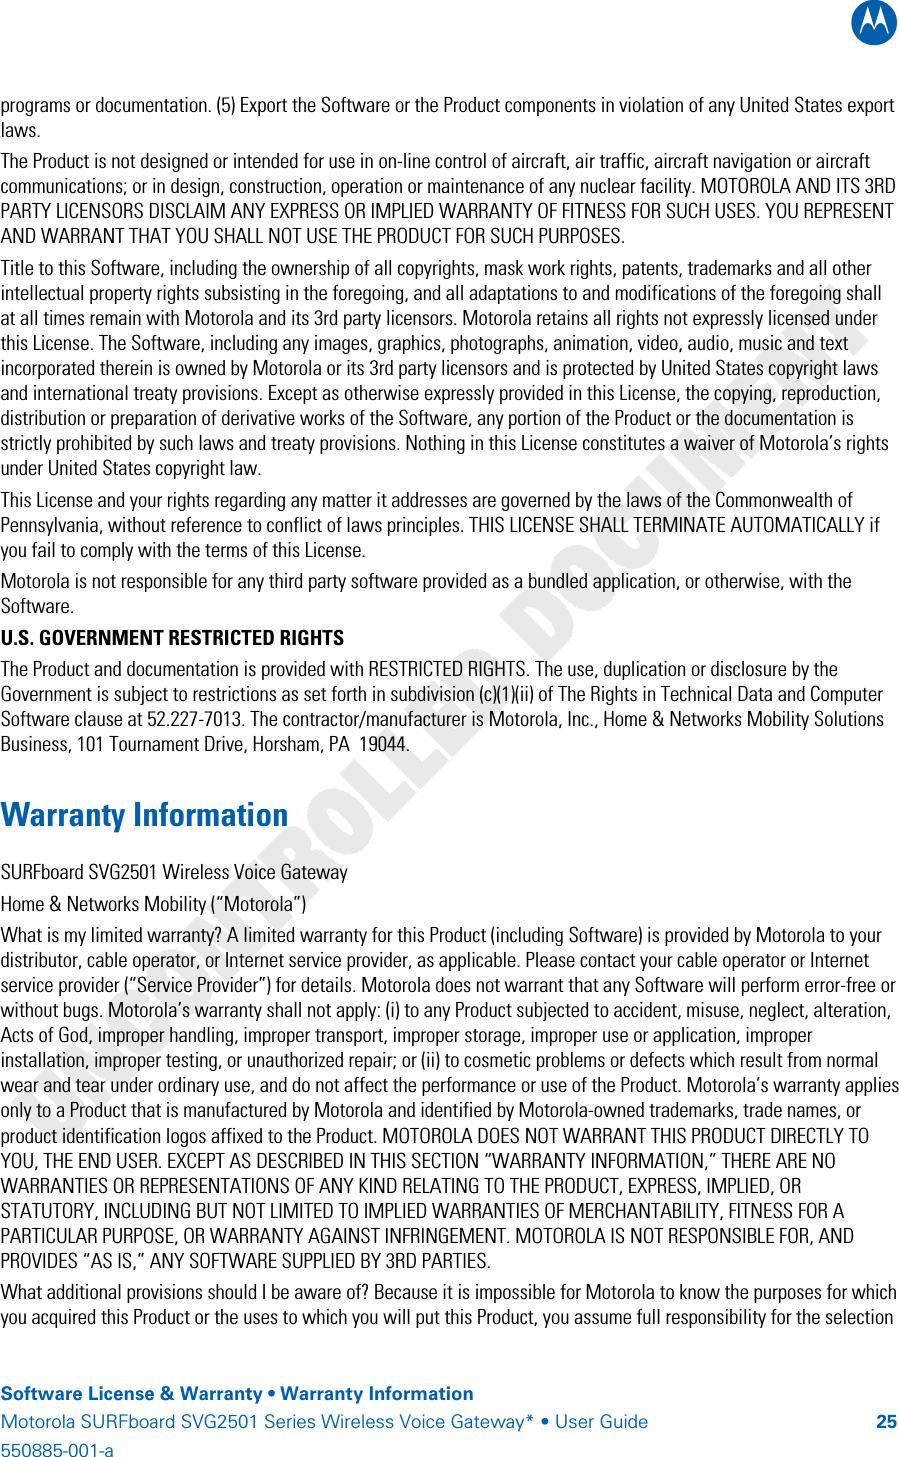 B    Software License &amp; Warranty • Warranty Information Motorola SURFboard SVG2501 Series Wireless Voice Gateway* • User Guide  25550885-001-a   programs or documentation. (5) Export the Software or the Product components in violation of any United States export laws. The Product is not designed or intended for use in on-line control of aircraft, air traffic, aircraft navigation or aircraft communications; or in design, construction, operation or maintenance of any nuclear facility. MOTOROLA AND ITS 3RD PARTY LICENSORS DISCLAIM ANY EXPRESS OR IMPLIED WARRANTY OF FITNESS FOR SUCH USES. YOU REPRESENT AND WARRANT THAT YOU SHALL NOT USE THE PRODUCT FOR SUCH PURPOSES. Title to this Software, including the ownership of all copyrights, mask work rights, patents, trademarks and all other intellectual property rights subsisting in the foregoing, and all adaptations to and modifications of the foregoing shall at all times remain with Motorola and its 3rd party licensors. Motorola retains all rights not expressly licensed under this License. The Software, including any images, graphics, photographs, animation, video, audio, music and text incorporated therein is owned by Motorola or its 3rd party licensors and is protected by United States copyright laws and international treaty provisions. Except as otherwise expressly provided in this License, the copying, reproduction, distribution or preparation of derivative works of the Software, any portion of the Product or the documentation is strictly prohibited by such laws and treaty provisions. Nothing in this License constitutes a waiver of Motorola’s rights under United States copyright law. This License and your rights regarding any matter it addresses are governed by the laws of the Commonwealth of Pennsylvania, without reference to conflict of laws principles. THIS LICENSE SHALL TERMINATE AUTOMATICALLY if you fail to comply with the terms of this License. Motorola is not responsible for any third party software provided as a bundled application, or otherwise, with the Software. U.S. GOVERNMENT RESTRICTED RIGHTS The Product and documentation is provided with RESTRICTED RIGHTS. The use, duplication or disclosure by the Government is subject to restrictions as set forth in subdivision (c)(1)(ii) of The Rights in Technical Data and Computer Software clause at 52.227-7013. The contractor/manufacturer is Motorola, Inc., Home &amp; Networks Mobility Solutions Business, 101 Tournament Drive, Horsham, PA  19044. Warranty Information SURFboard SVG2501 Wireless Voice Gateway Home &amp; Networks Mobility (“Motorola”)  What is my limited warranty? A limited warranty for this Product (including Software) is provided by Motorola to your distributor, cable operator, or Internet service provider, as applicable. Please contact your cable operator or Internet service provider (“Service Provider”) for details. Motorola does not warrant that any Software will perform error-free or without bugs. Motorola’s warranty shall not apply: (i) to any Product subjected to accident, misuse, neglect, alteration, Acts of God, improper handling, improper transport, improper storage, improper use or application, improper installation, improper testing, or unauthorized repair; or (ii) to cosmetic problems or defects which result from normal wear and tear under ordinary use, and do not affect the performance or use of the Product. Motorola’s warranty applies only to a Product that is manufactured by Motorola and identified by Motorola-owned trademarks, trade names, or product identification logos affixed to the Product. MOTOROLA DOES NOT WARRANT THIS PRODUCT DIRECTLY TO YOU, THE END USER. EXCEPT AS DESCRIBED IN THIS SECTION “WARRANTY INFORMATION,” THERE ARE NO WARRANTIES OR REPRESENTATIONS OF ANY KIND RELATING TO THE PRODUCT, EXPRESS, IMPLIED, OR STATUTORY, INCLUDING BUT NOT LIMITED TO IMPLIED WARRANTIES OF MERCHANTABILITY, FITNESS FOR A PARTICULAR PURPOSE, OR WARRANTY AGAINST INFRINGEMENT. MOTOROLA IS NOT RESPONSIBLE FOR, AND PROVIDES “AS IS,” ANY SOFTWARE SUPPLIED BY 3RD PARTIES. What additional provisions should I be aware of? Because it is impossible for Motorola to know the purposes for which you acquired this Product or the uses to which you will put this Product, you assume full responsibility for the selection 